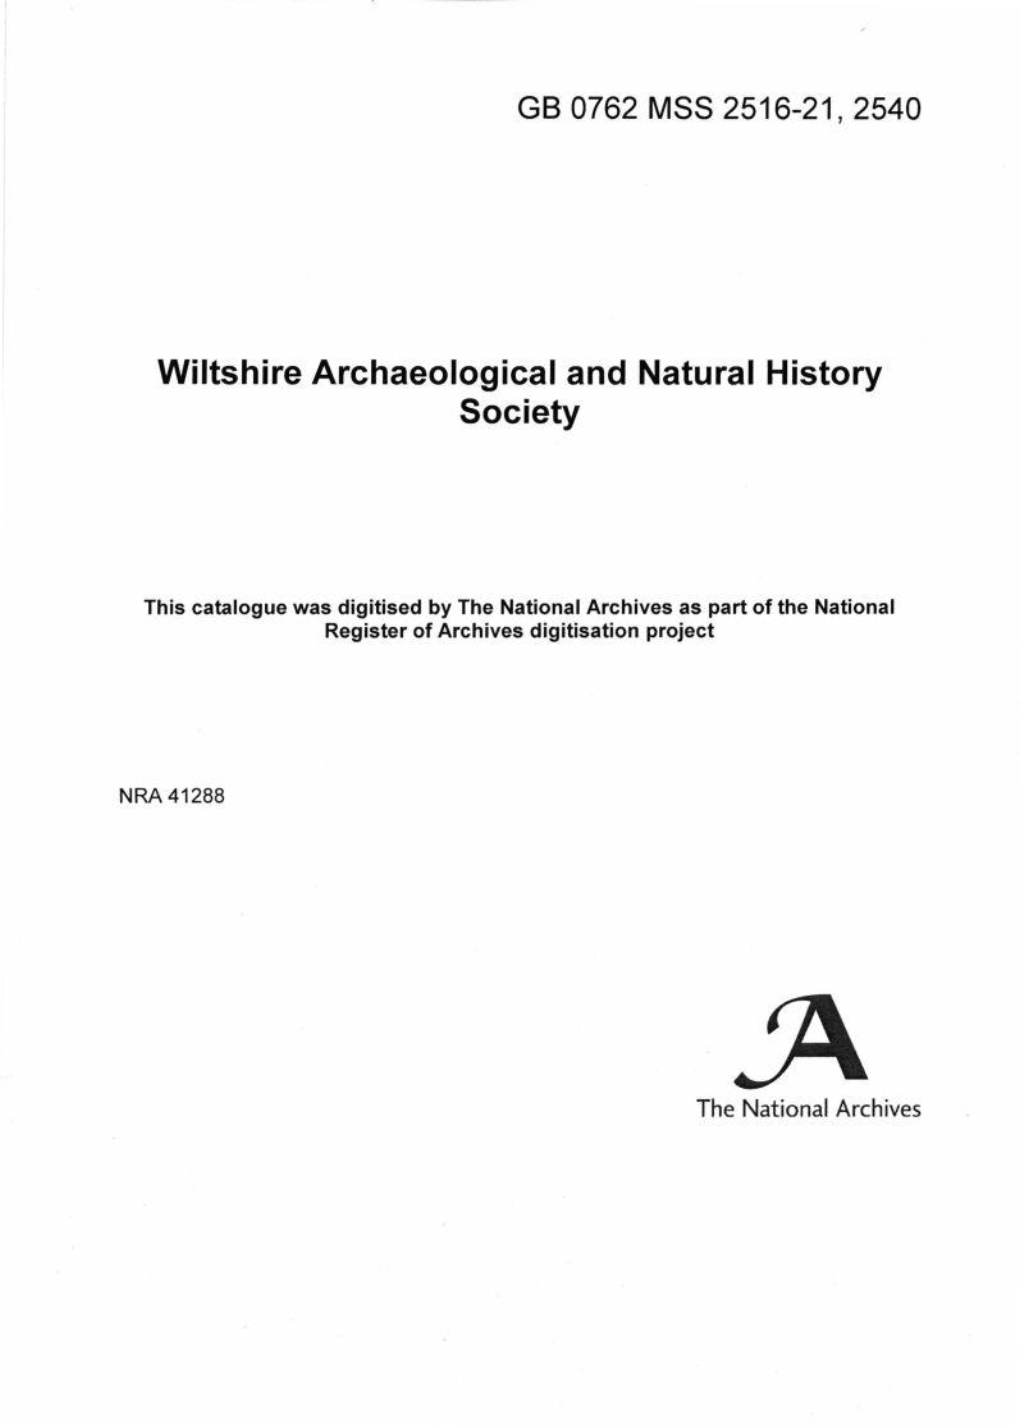 Wiltshire Archaeological and Natural History Society